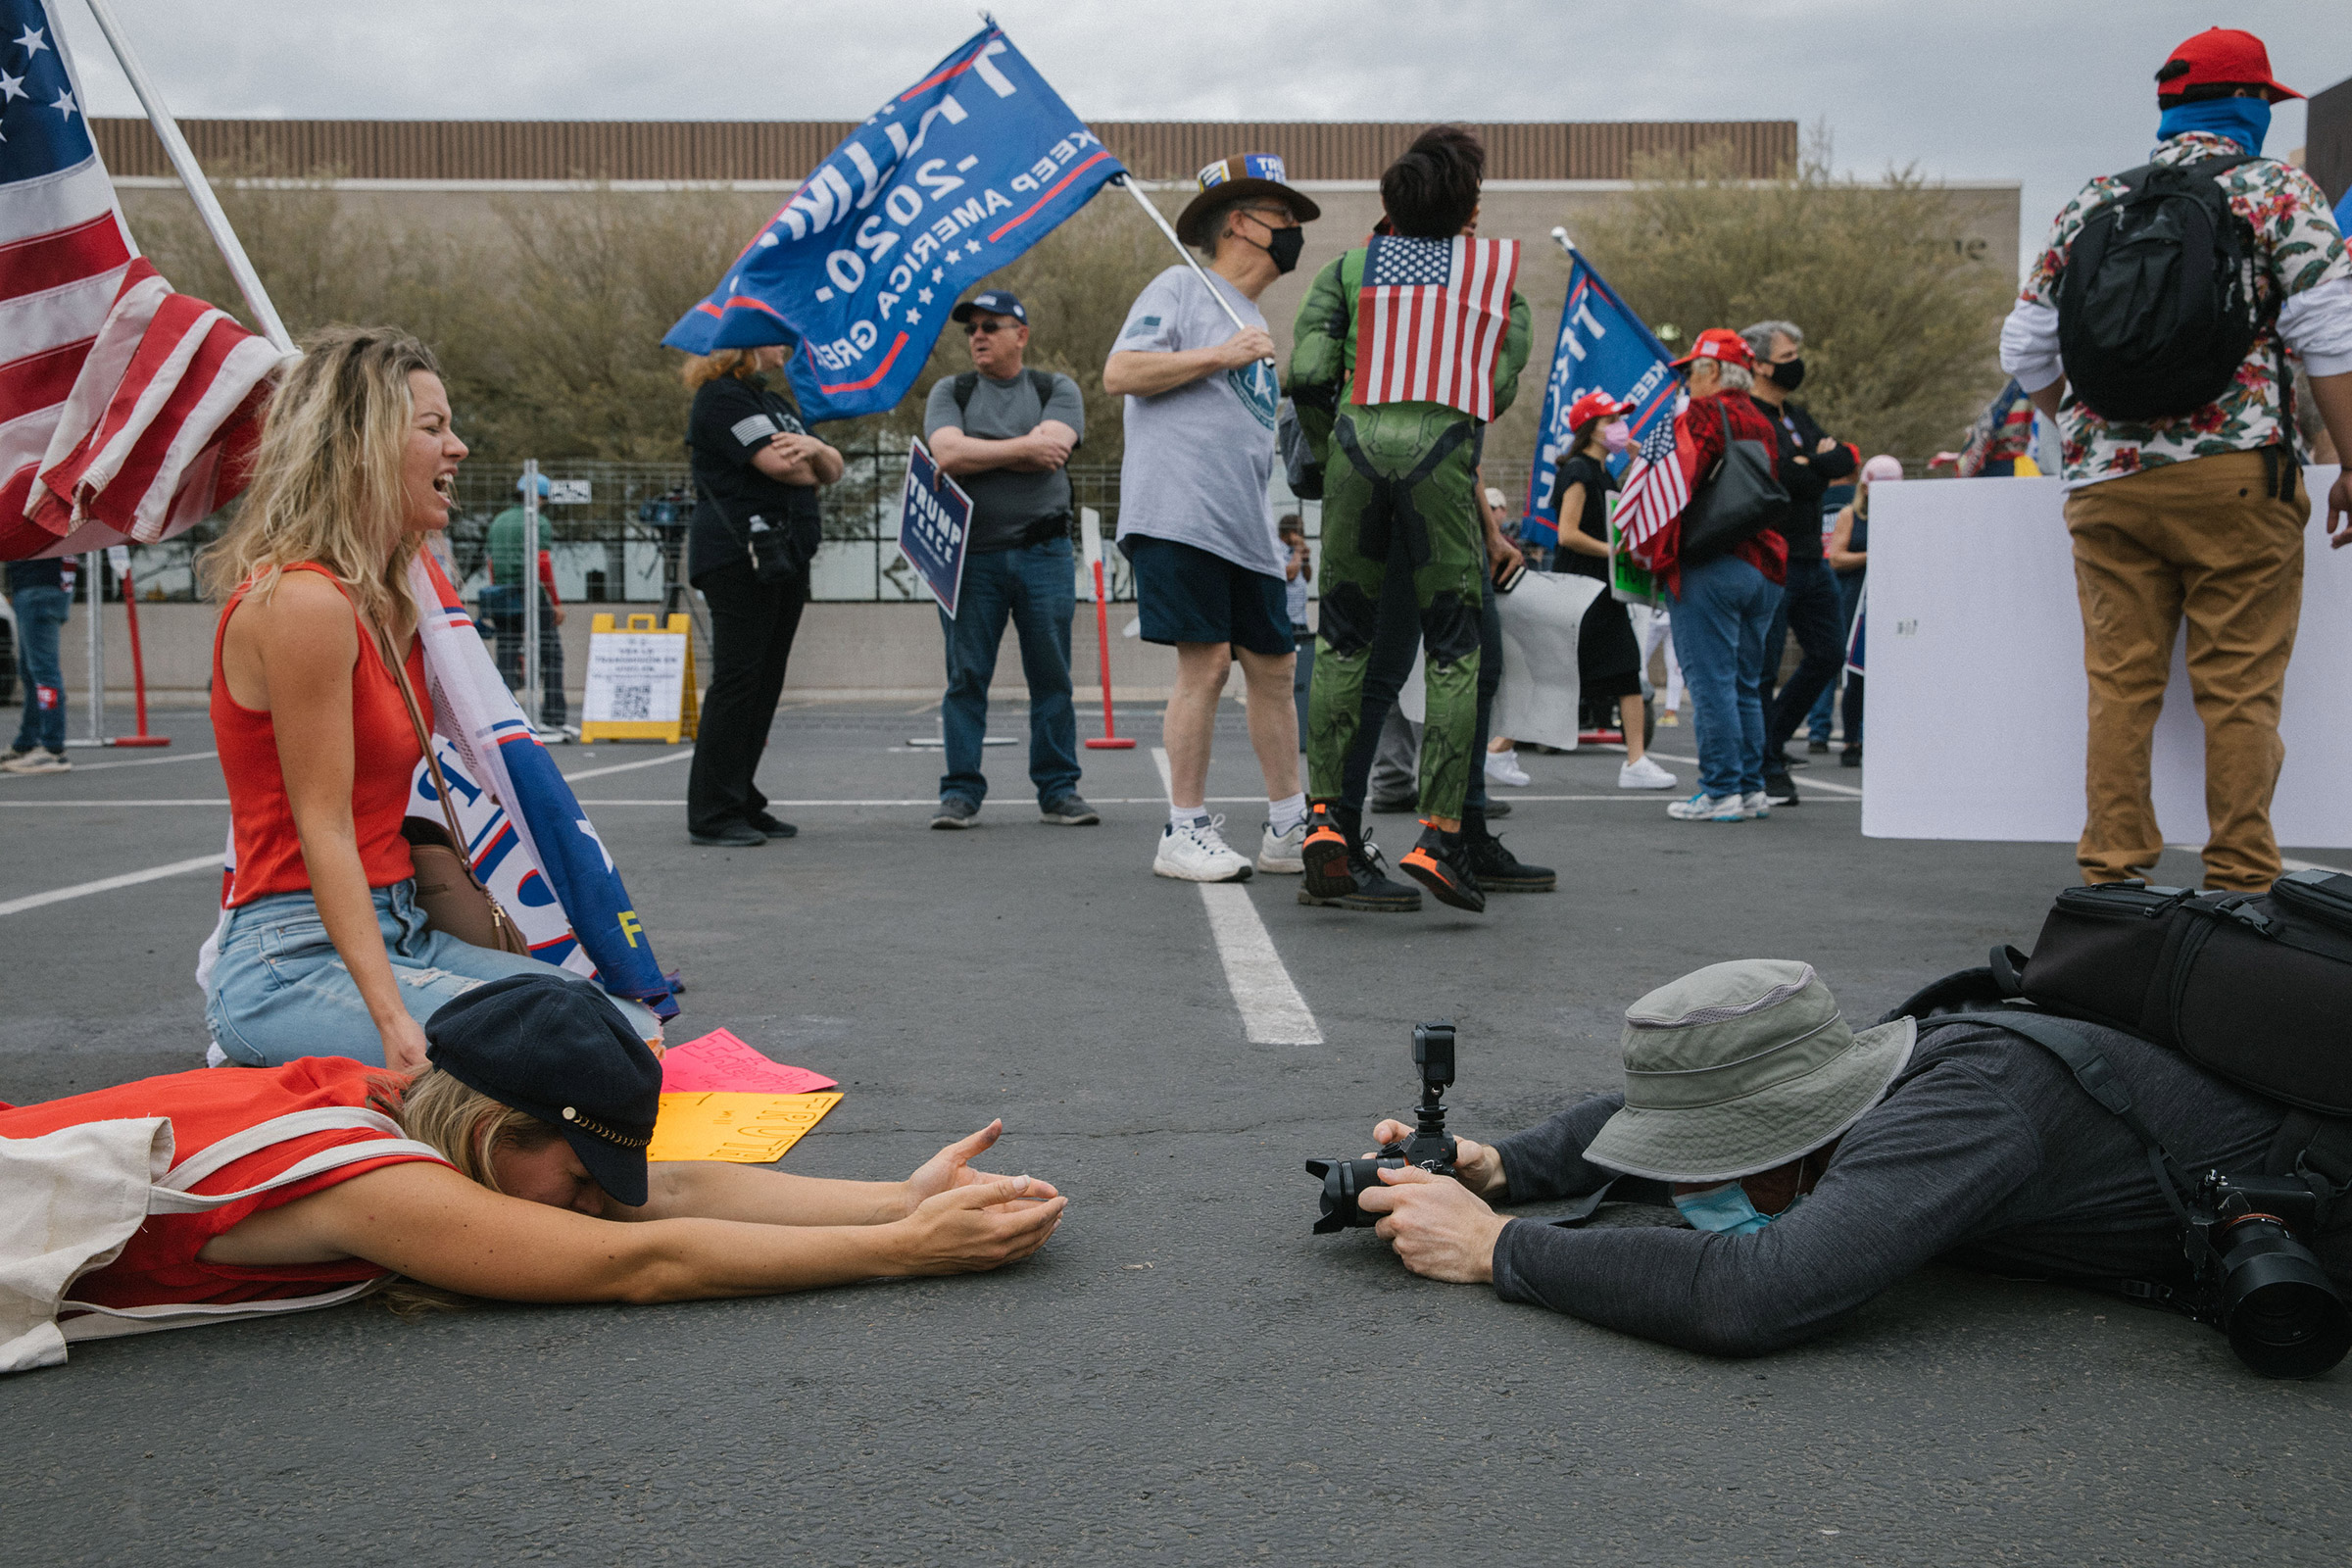 Women pray in the parking lot outside of the Maricopa County Elections Office in Phoenix, Ariz., on Nov. 6. (Sinna Nasseri for TIME)